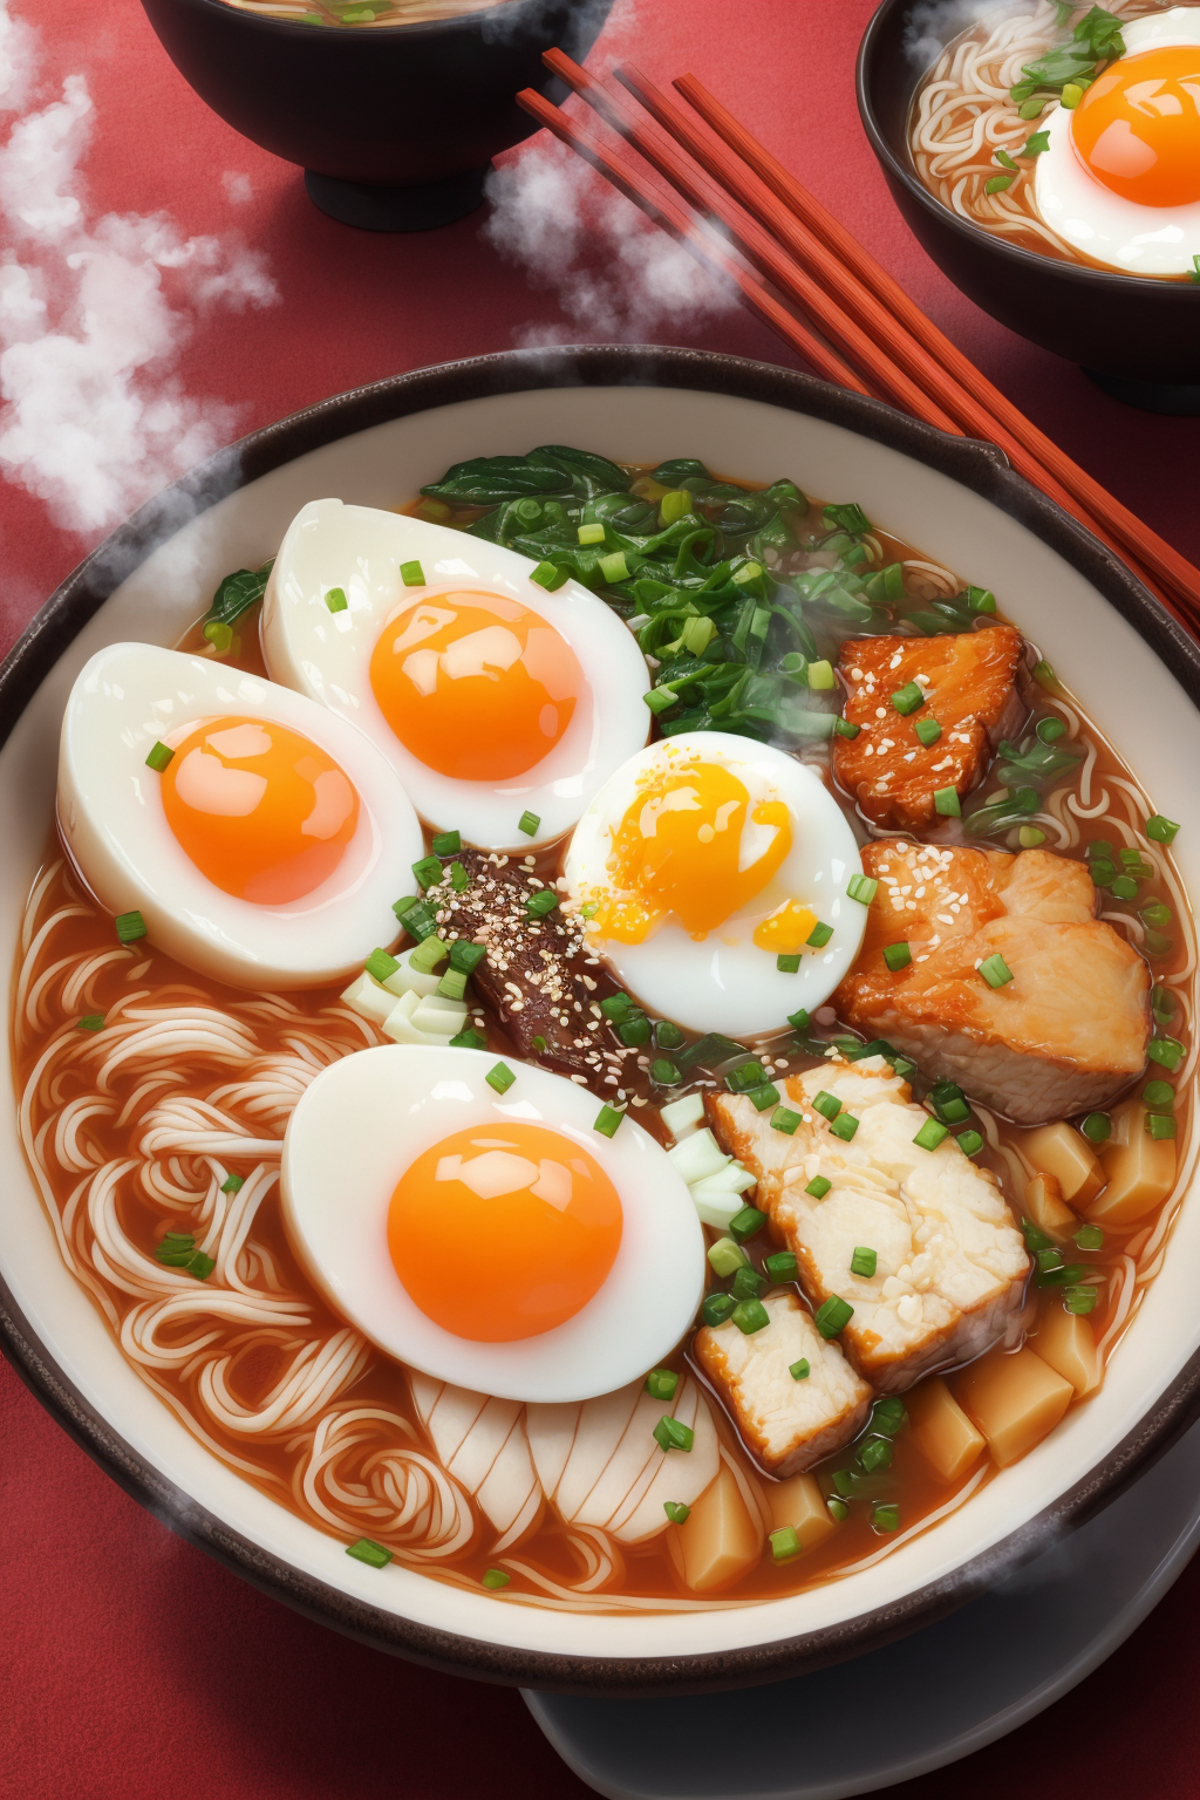 A Bowl of Noodles with Eggs, Chicken, and Vegetables